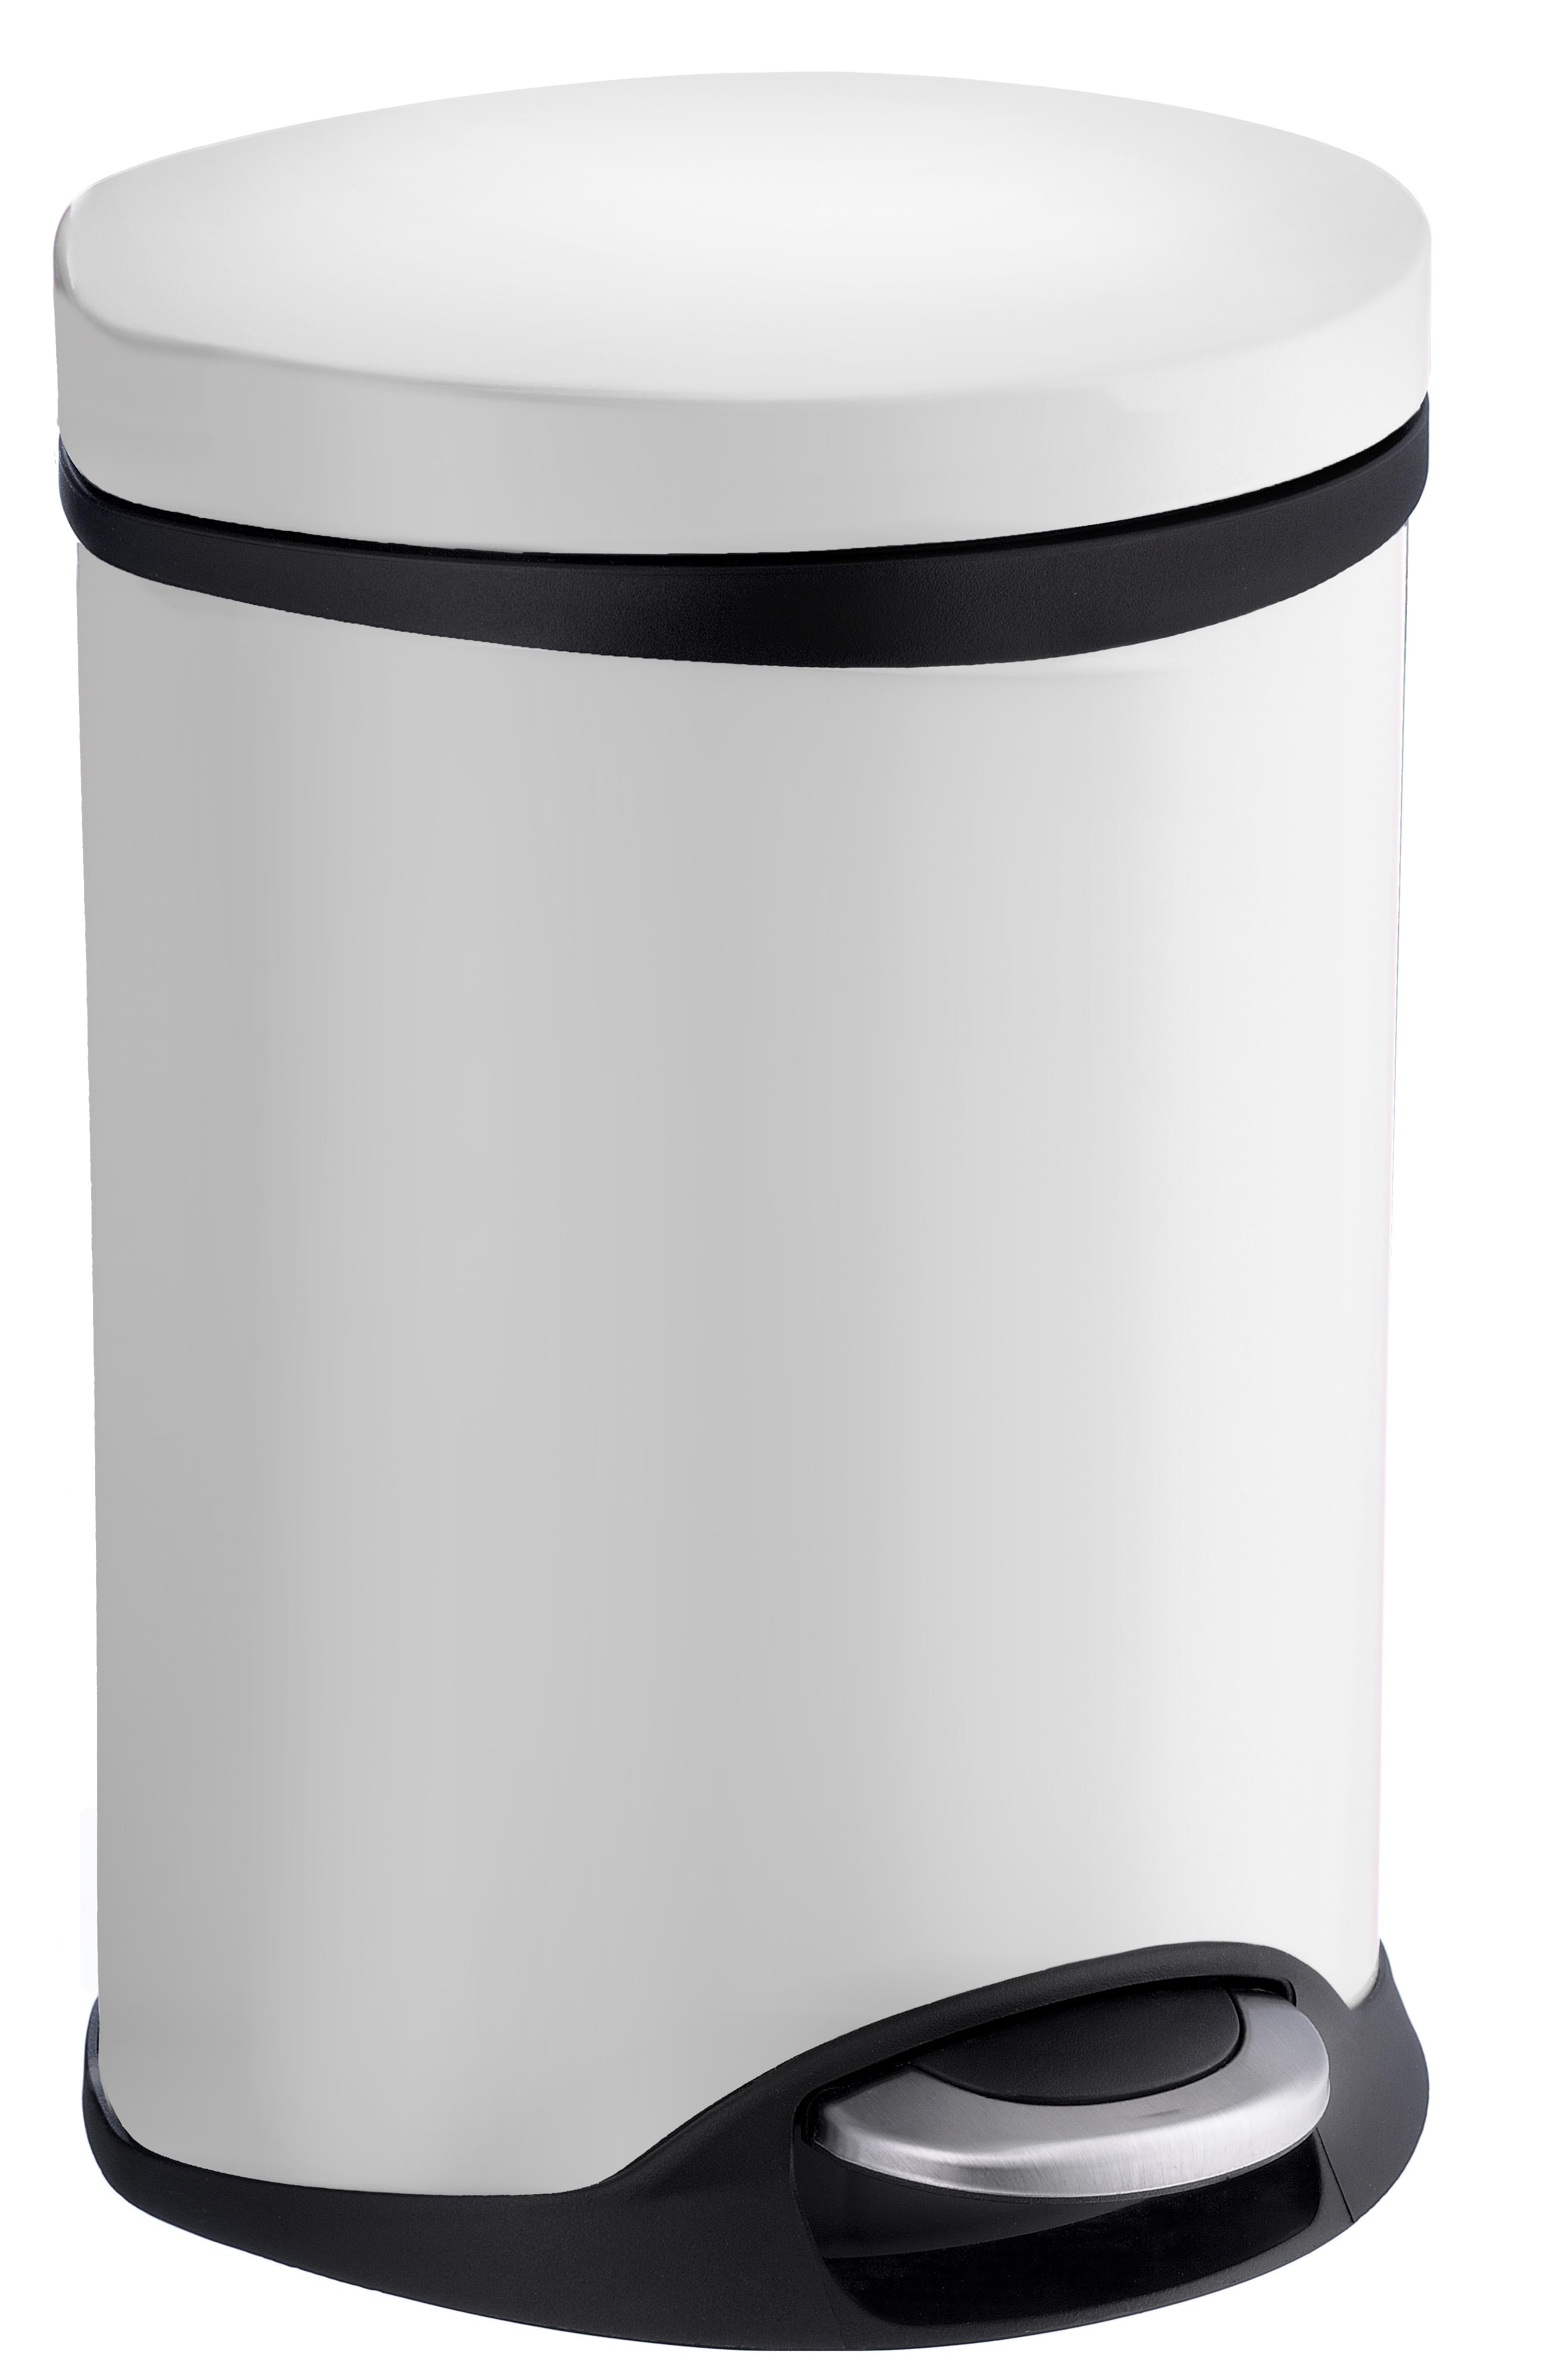 white lacquered stainless steel pedal bin